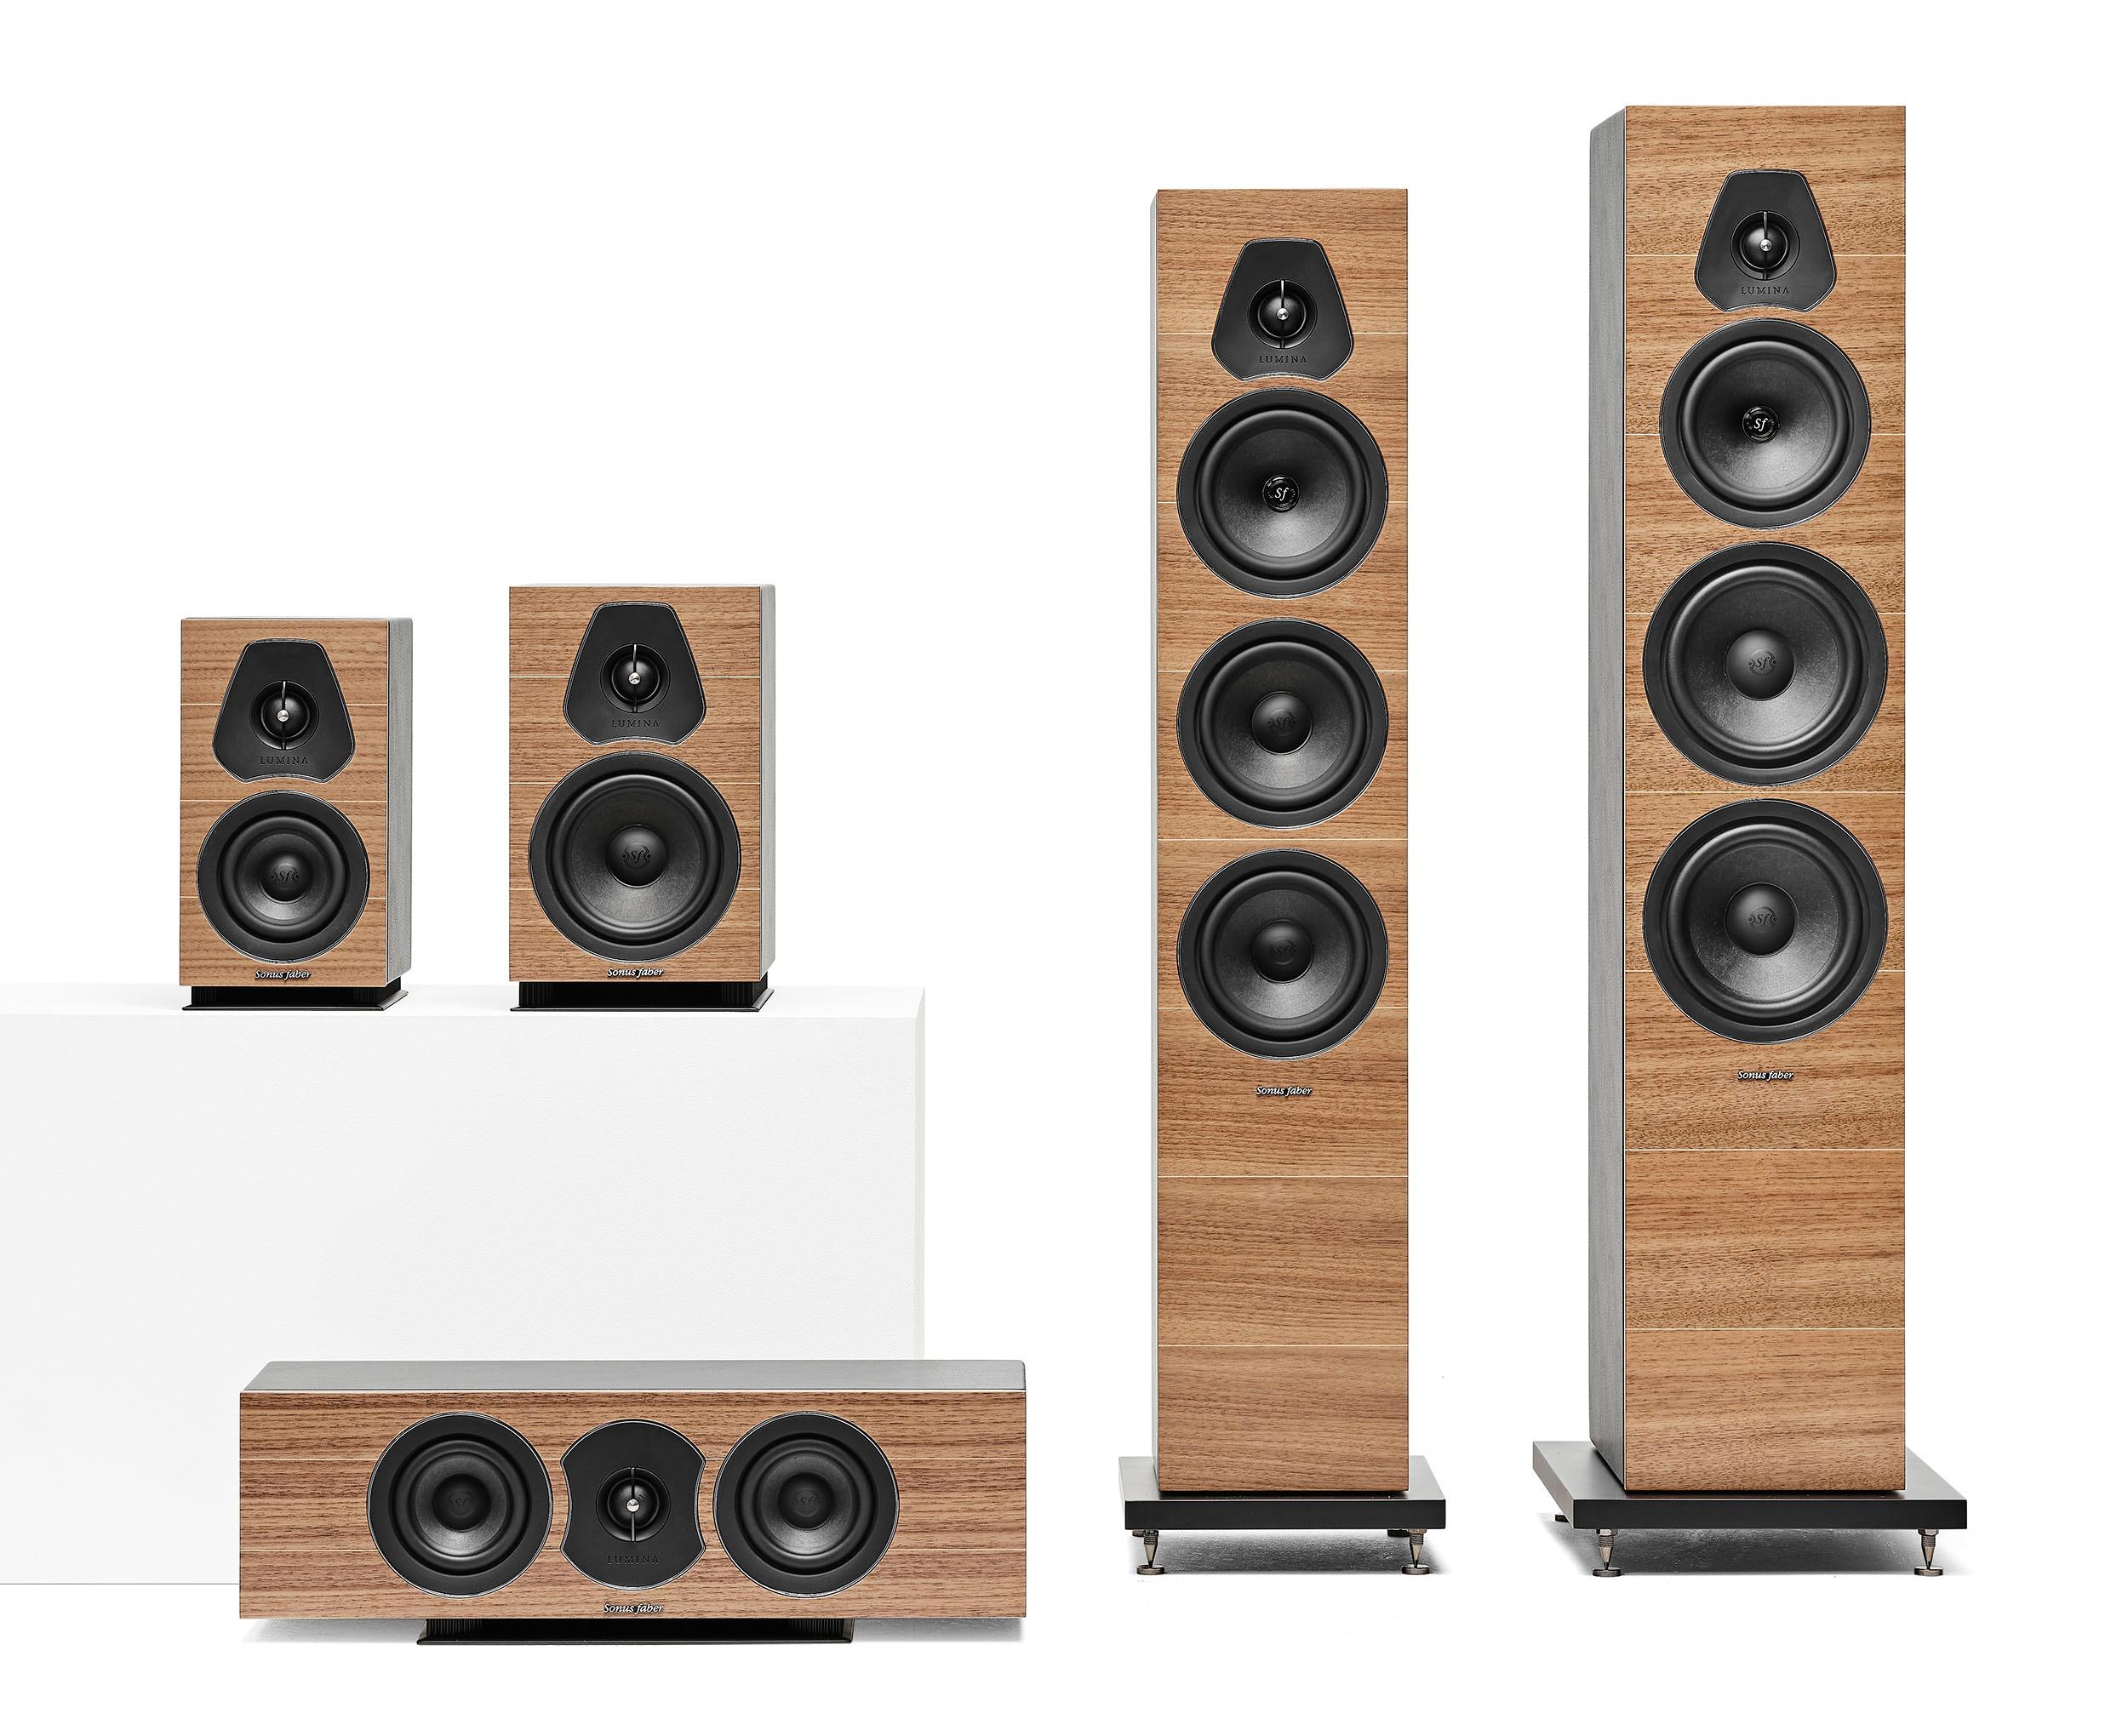 The line debuted in Fall 2020 and included two other models, as well as a center channel speaker option. 6c0b6fed lumina collection